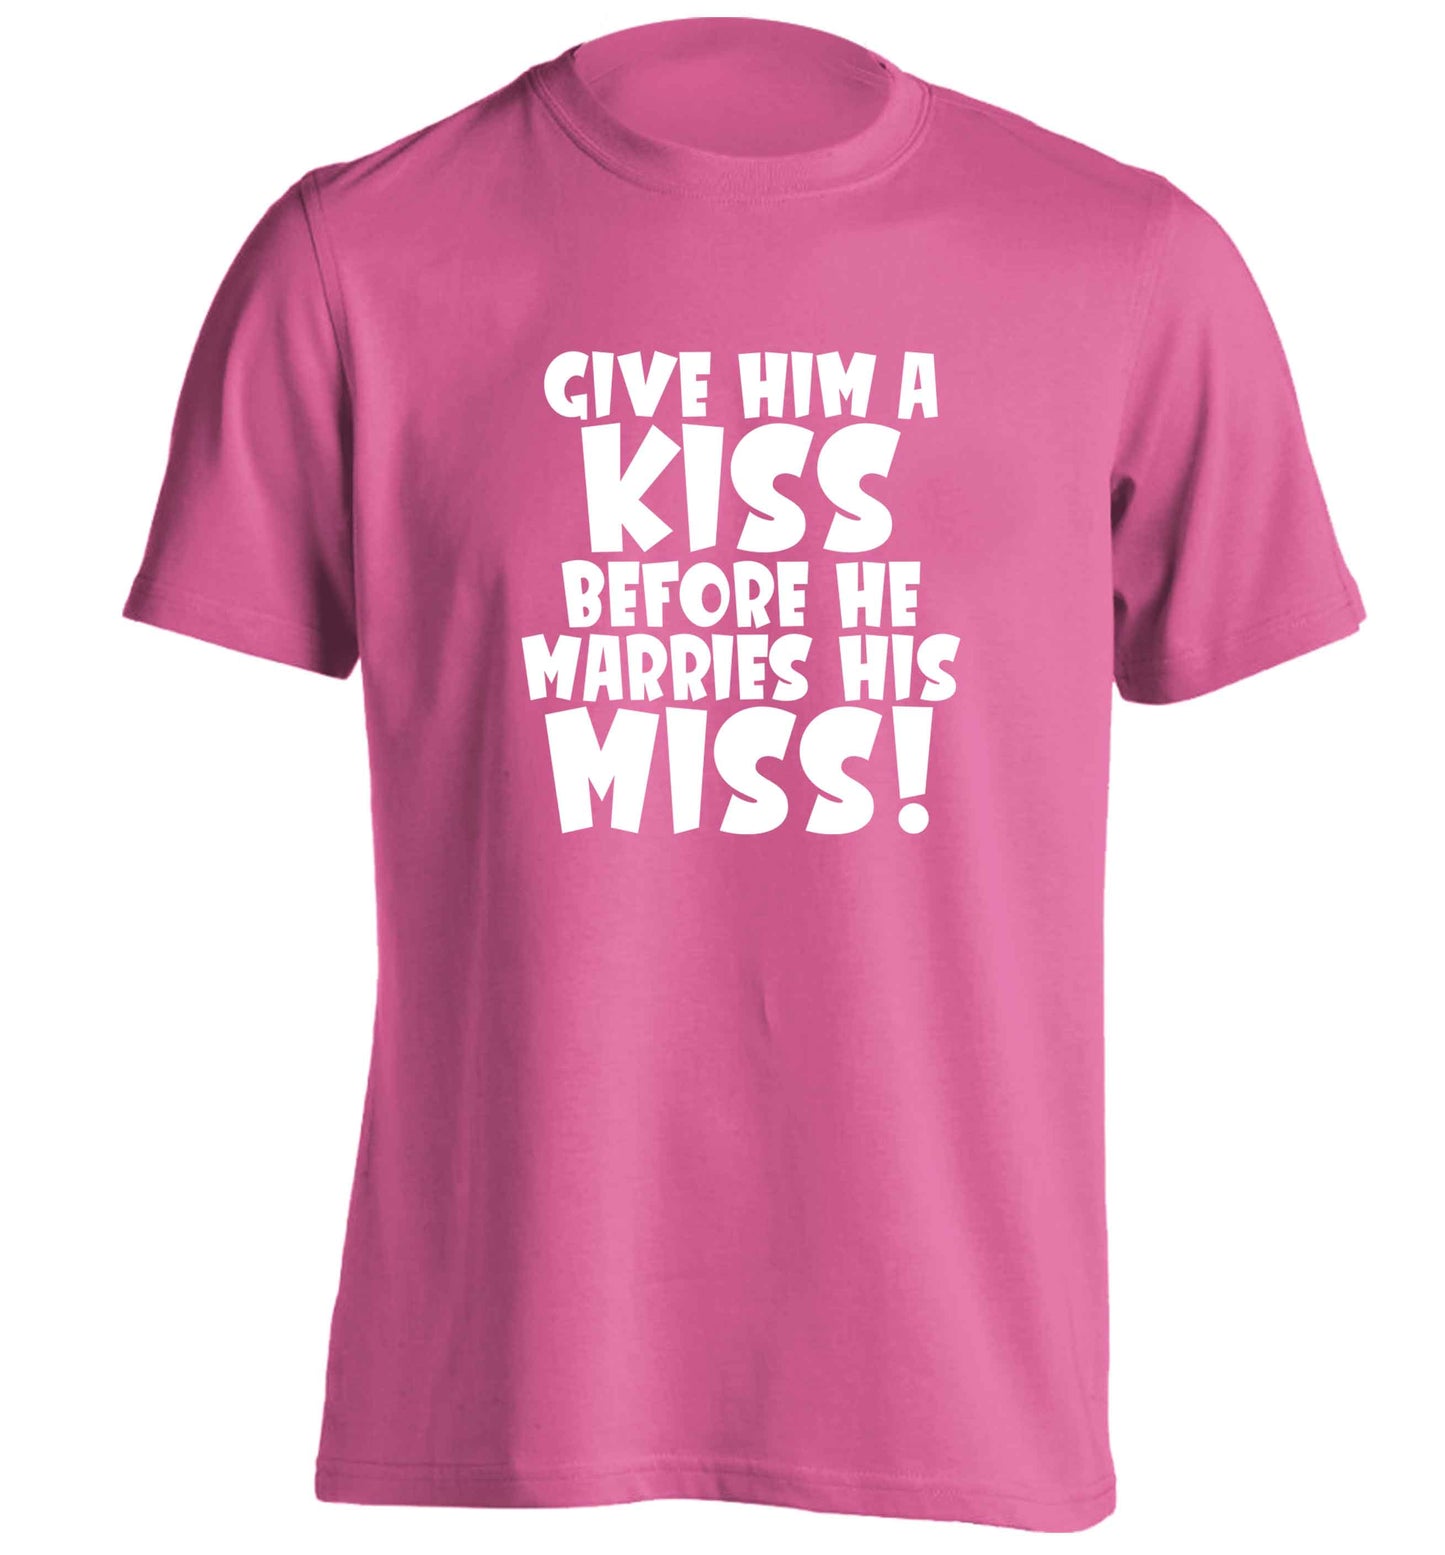 Give him a kiss before he marries his miss adults unisex pink Tshirt 2XL